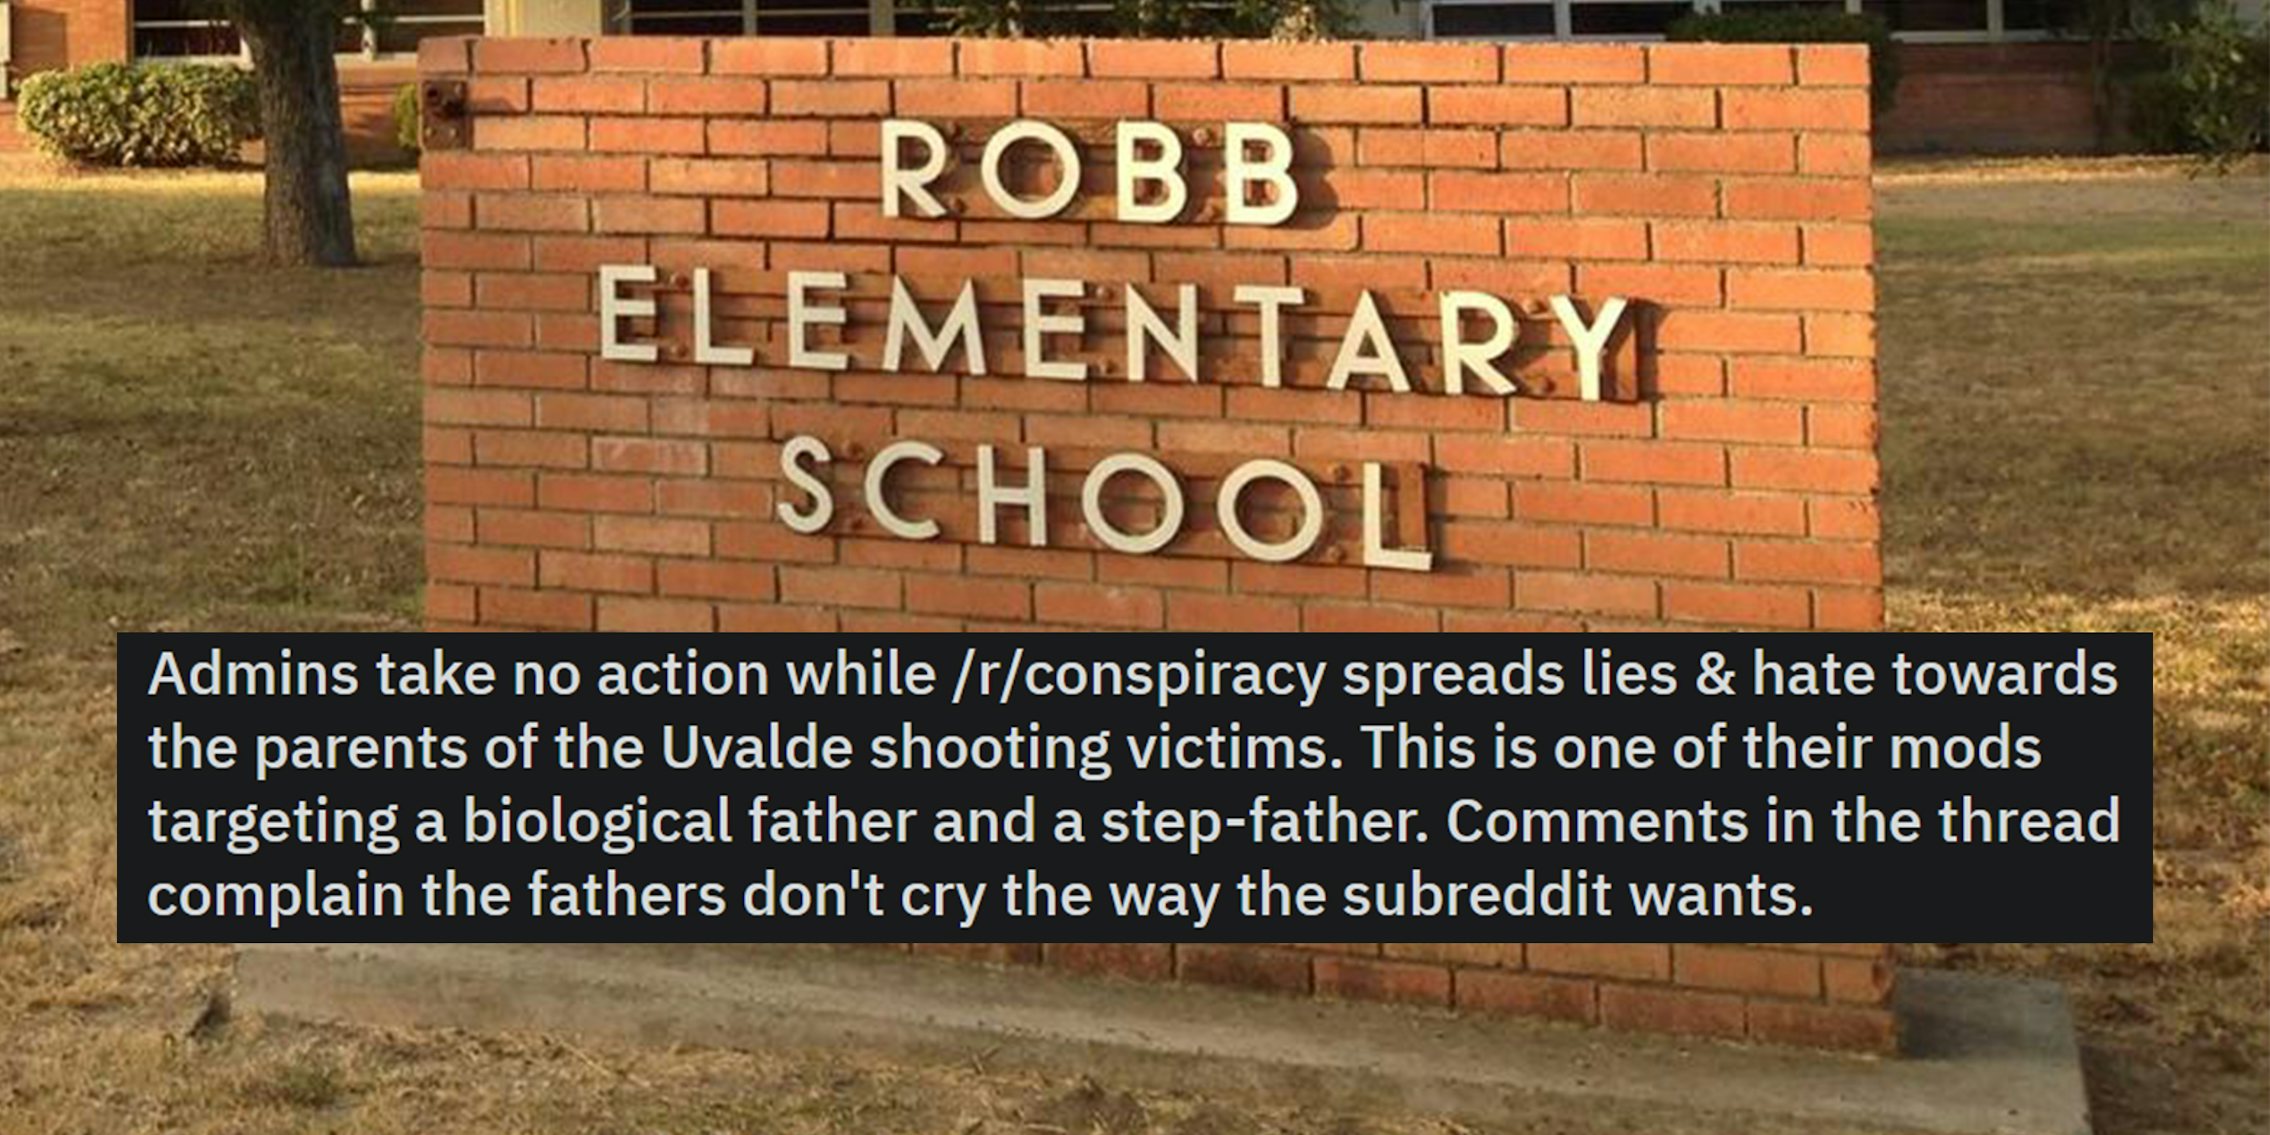 Ulvade Texas Robb Elementary School sign outside with Reddit post by justalazygamer centered caption 'Admins take no action while /r/conspiracy spreads lies & hate towards the parents of the Ulvade shooting victims. This is one of their mods targeting a biological father and a step-father. Comments in the thread complain the fathers don't cry the way the subreddit wants.'